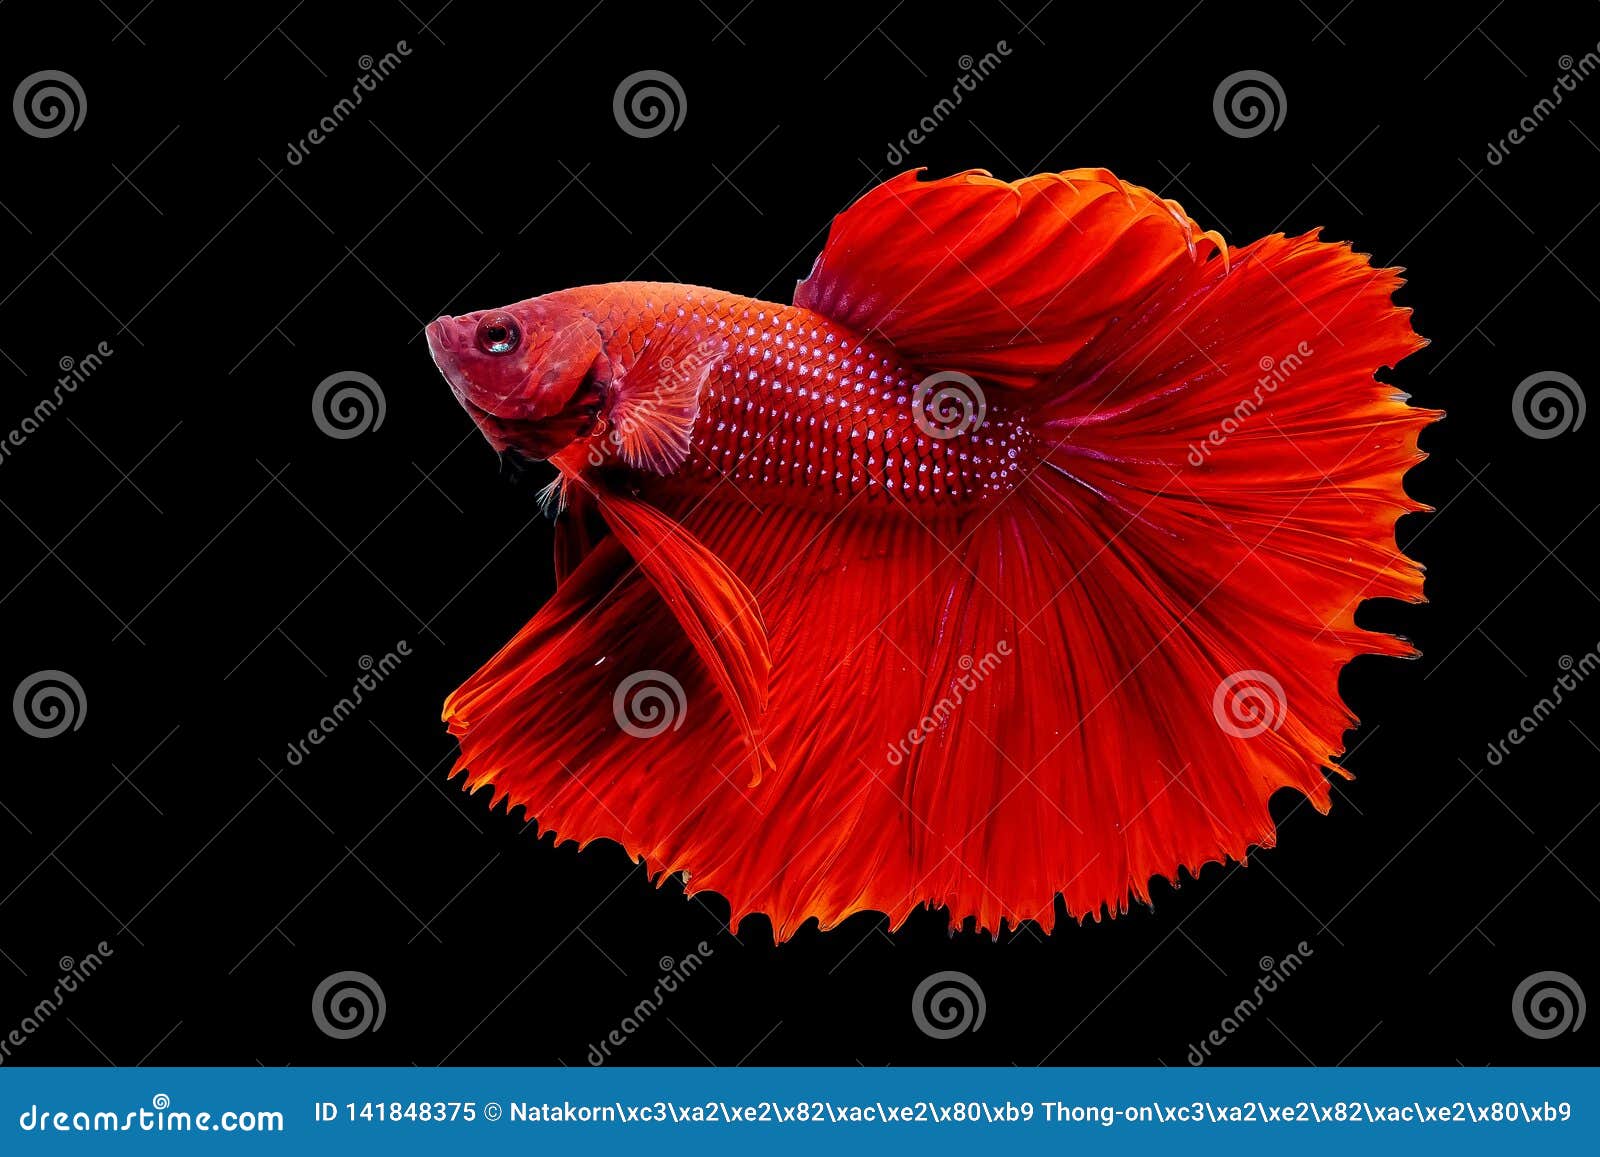 Thai Fighting Fish is a Beautiful Fish and Thai National Fish ...